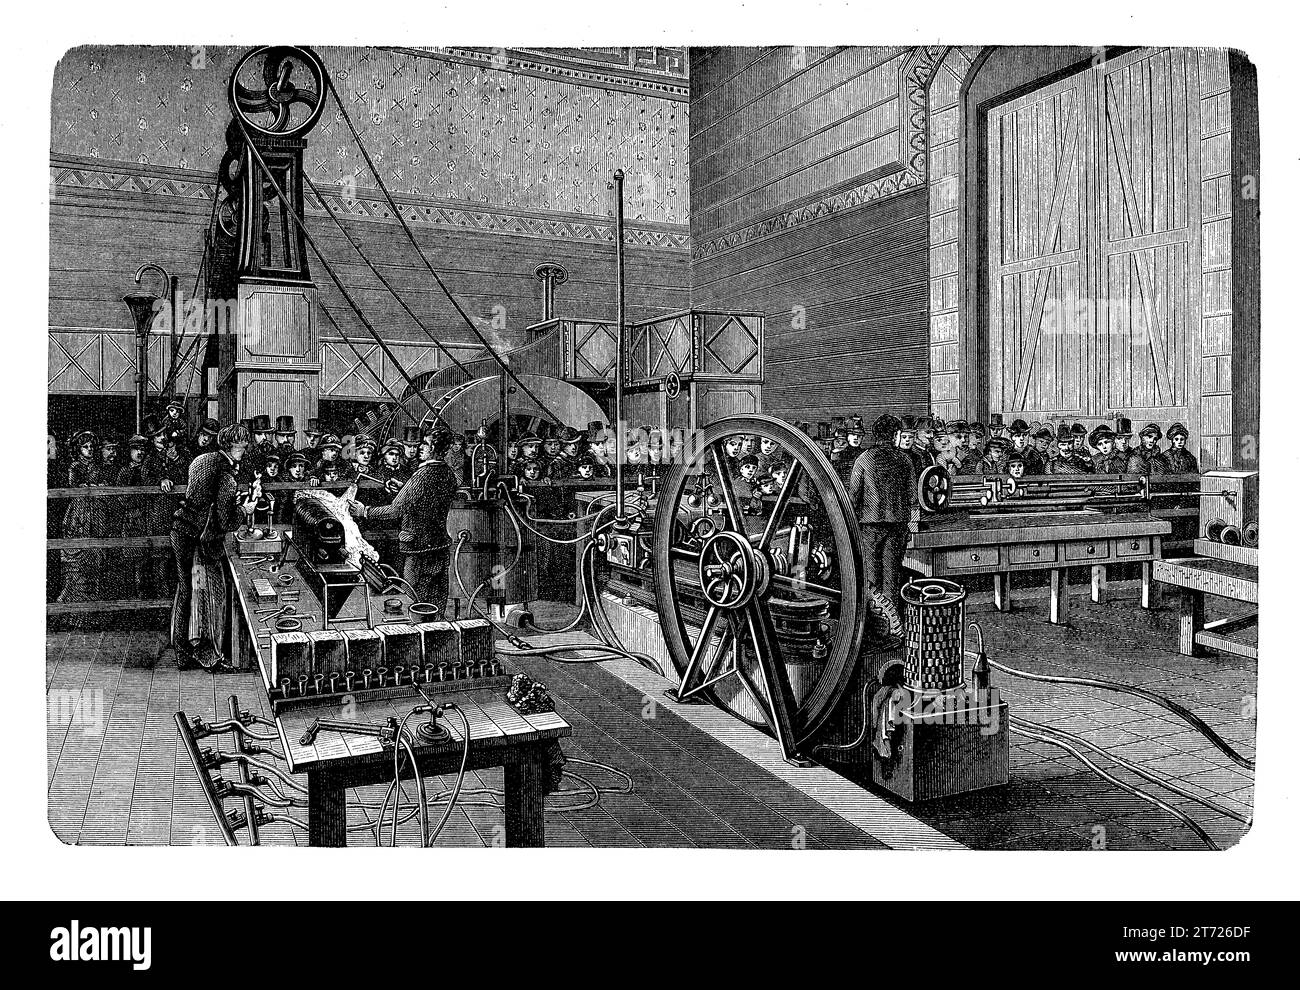 Machine room at Musee des Arts et Metiers Paris, founded in 1794 the oldest science museum in all of Europe with a vast collection of scientific instruments, machines and tools Stock Photo